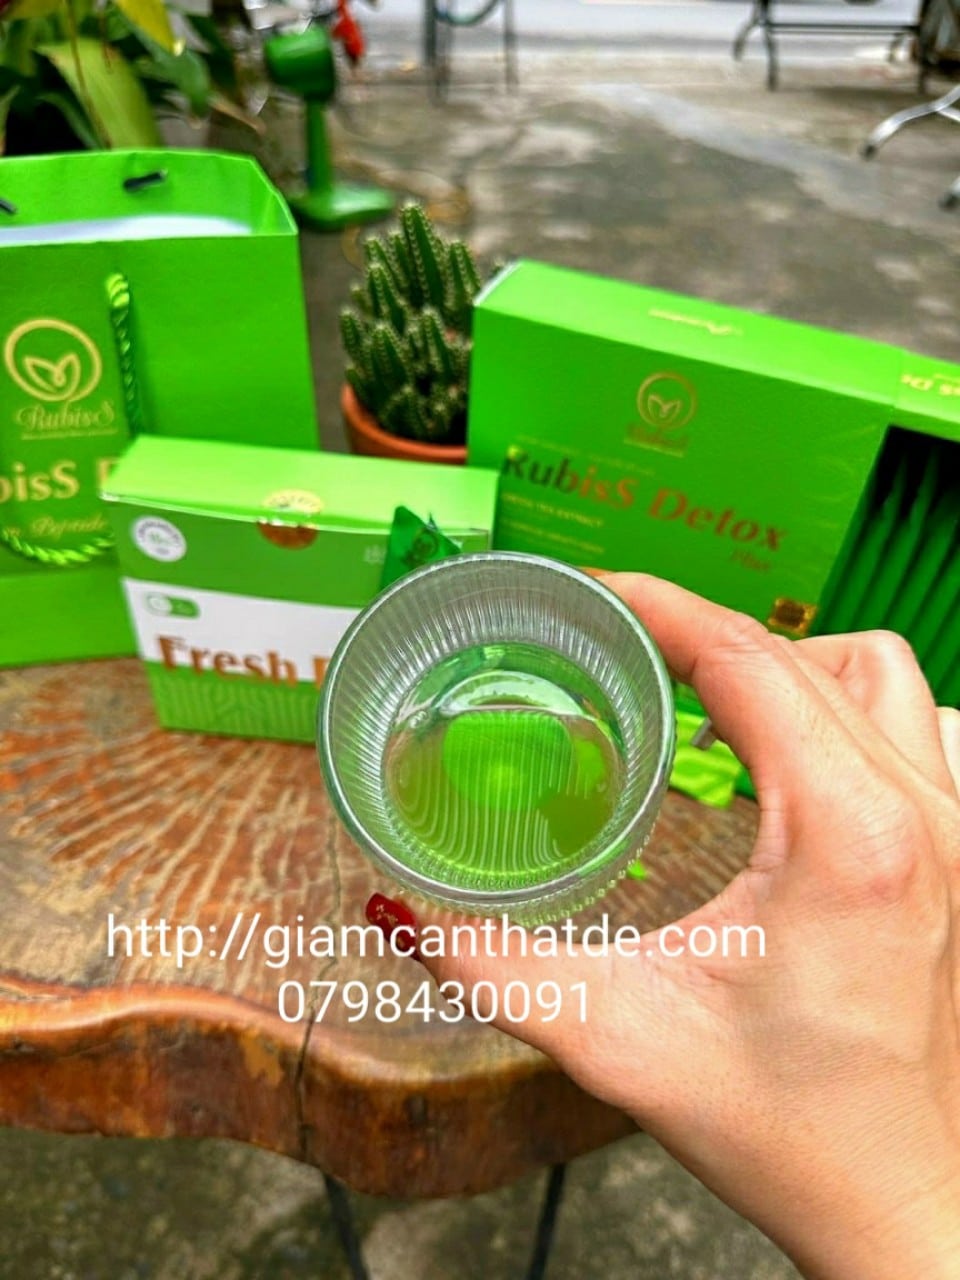 cong_dung_cua_nuoc_rubiss_detox_plus_collagen_peptide